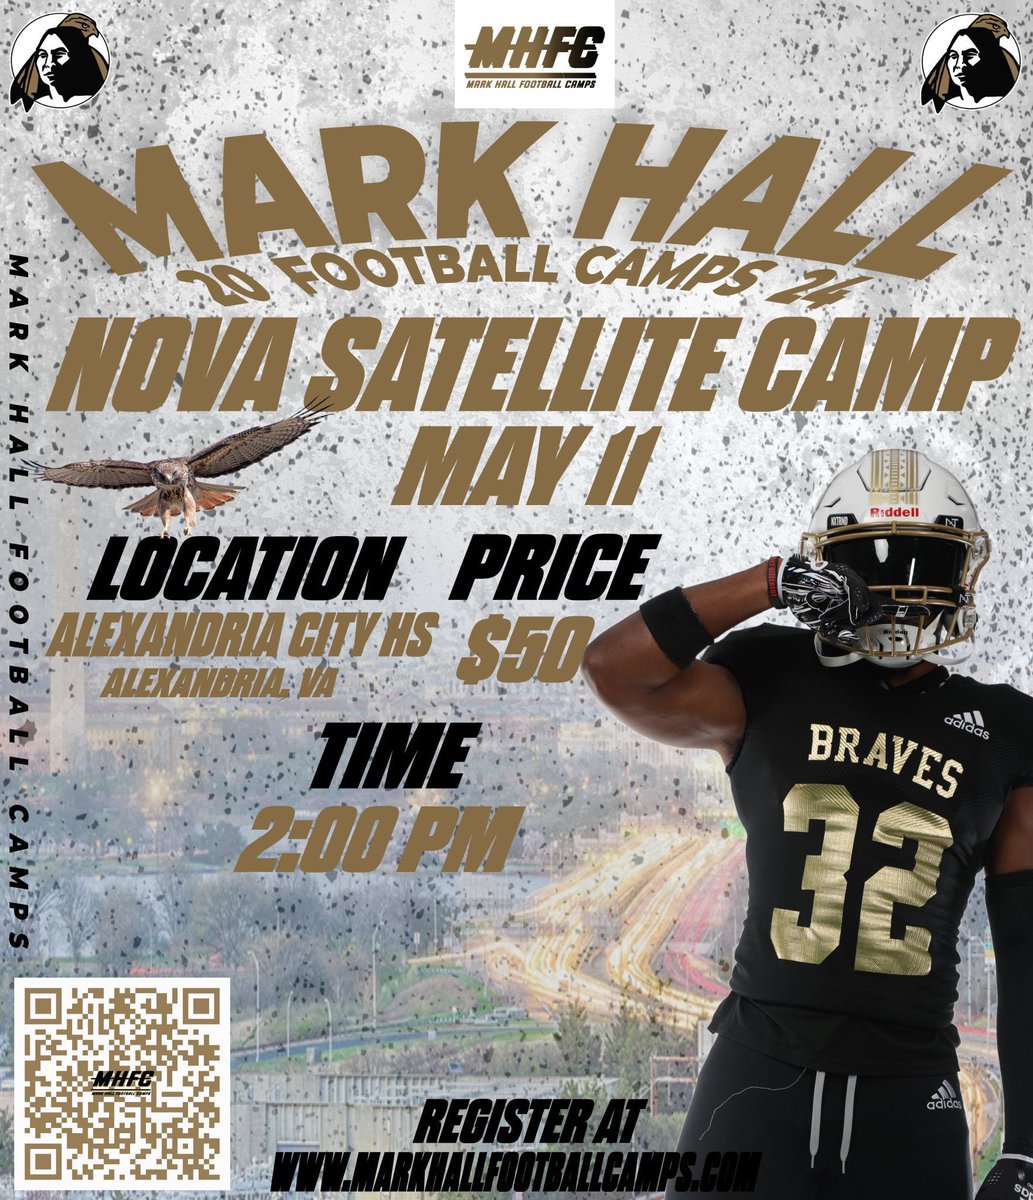 🚨24 HOURS until @UNCP_Football hits the road to VA!! Don’t miss this opportunity!! Sign up now: markhallfootballcamps.com/blank